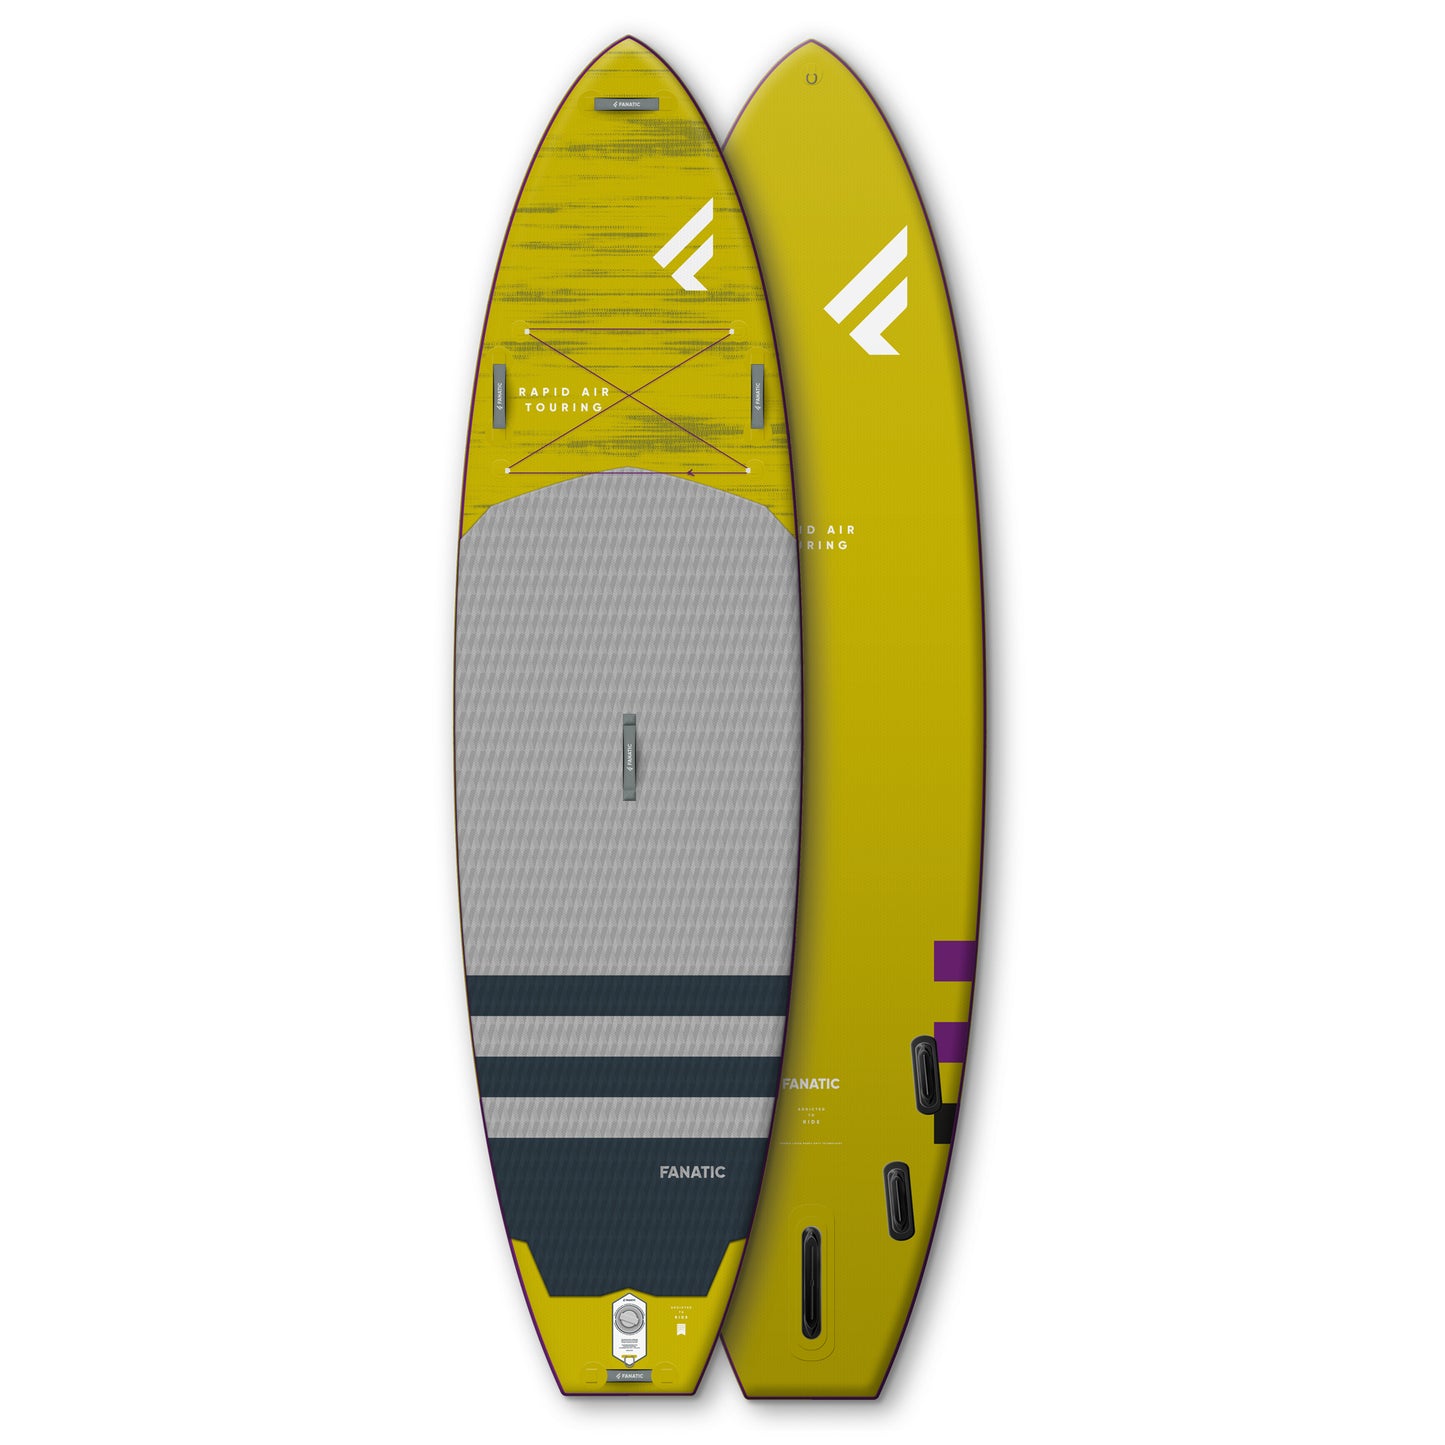 Fanatic iSUP Rapid Air Touring – SUP Inflatable Board